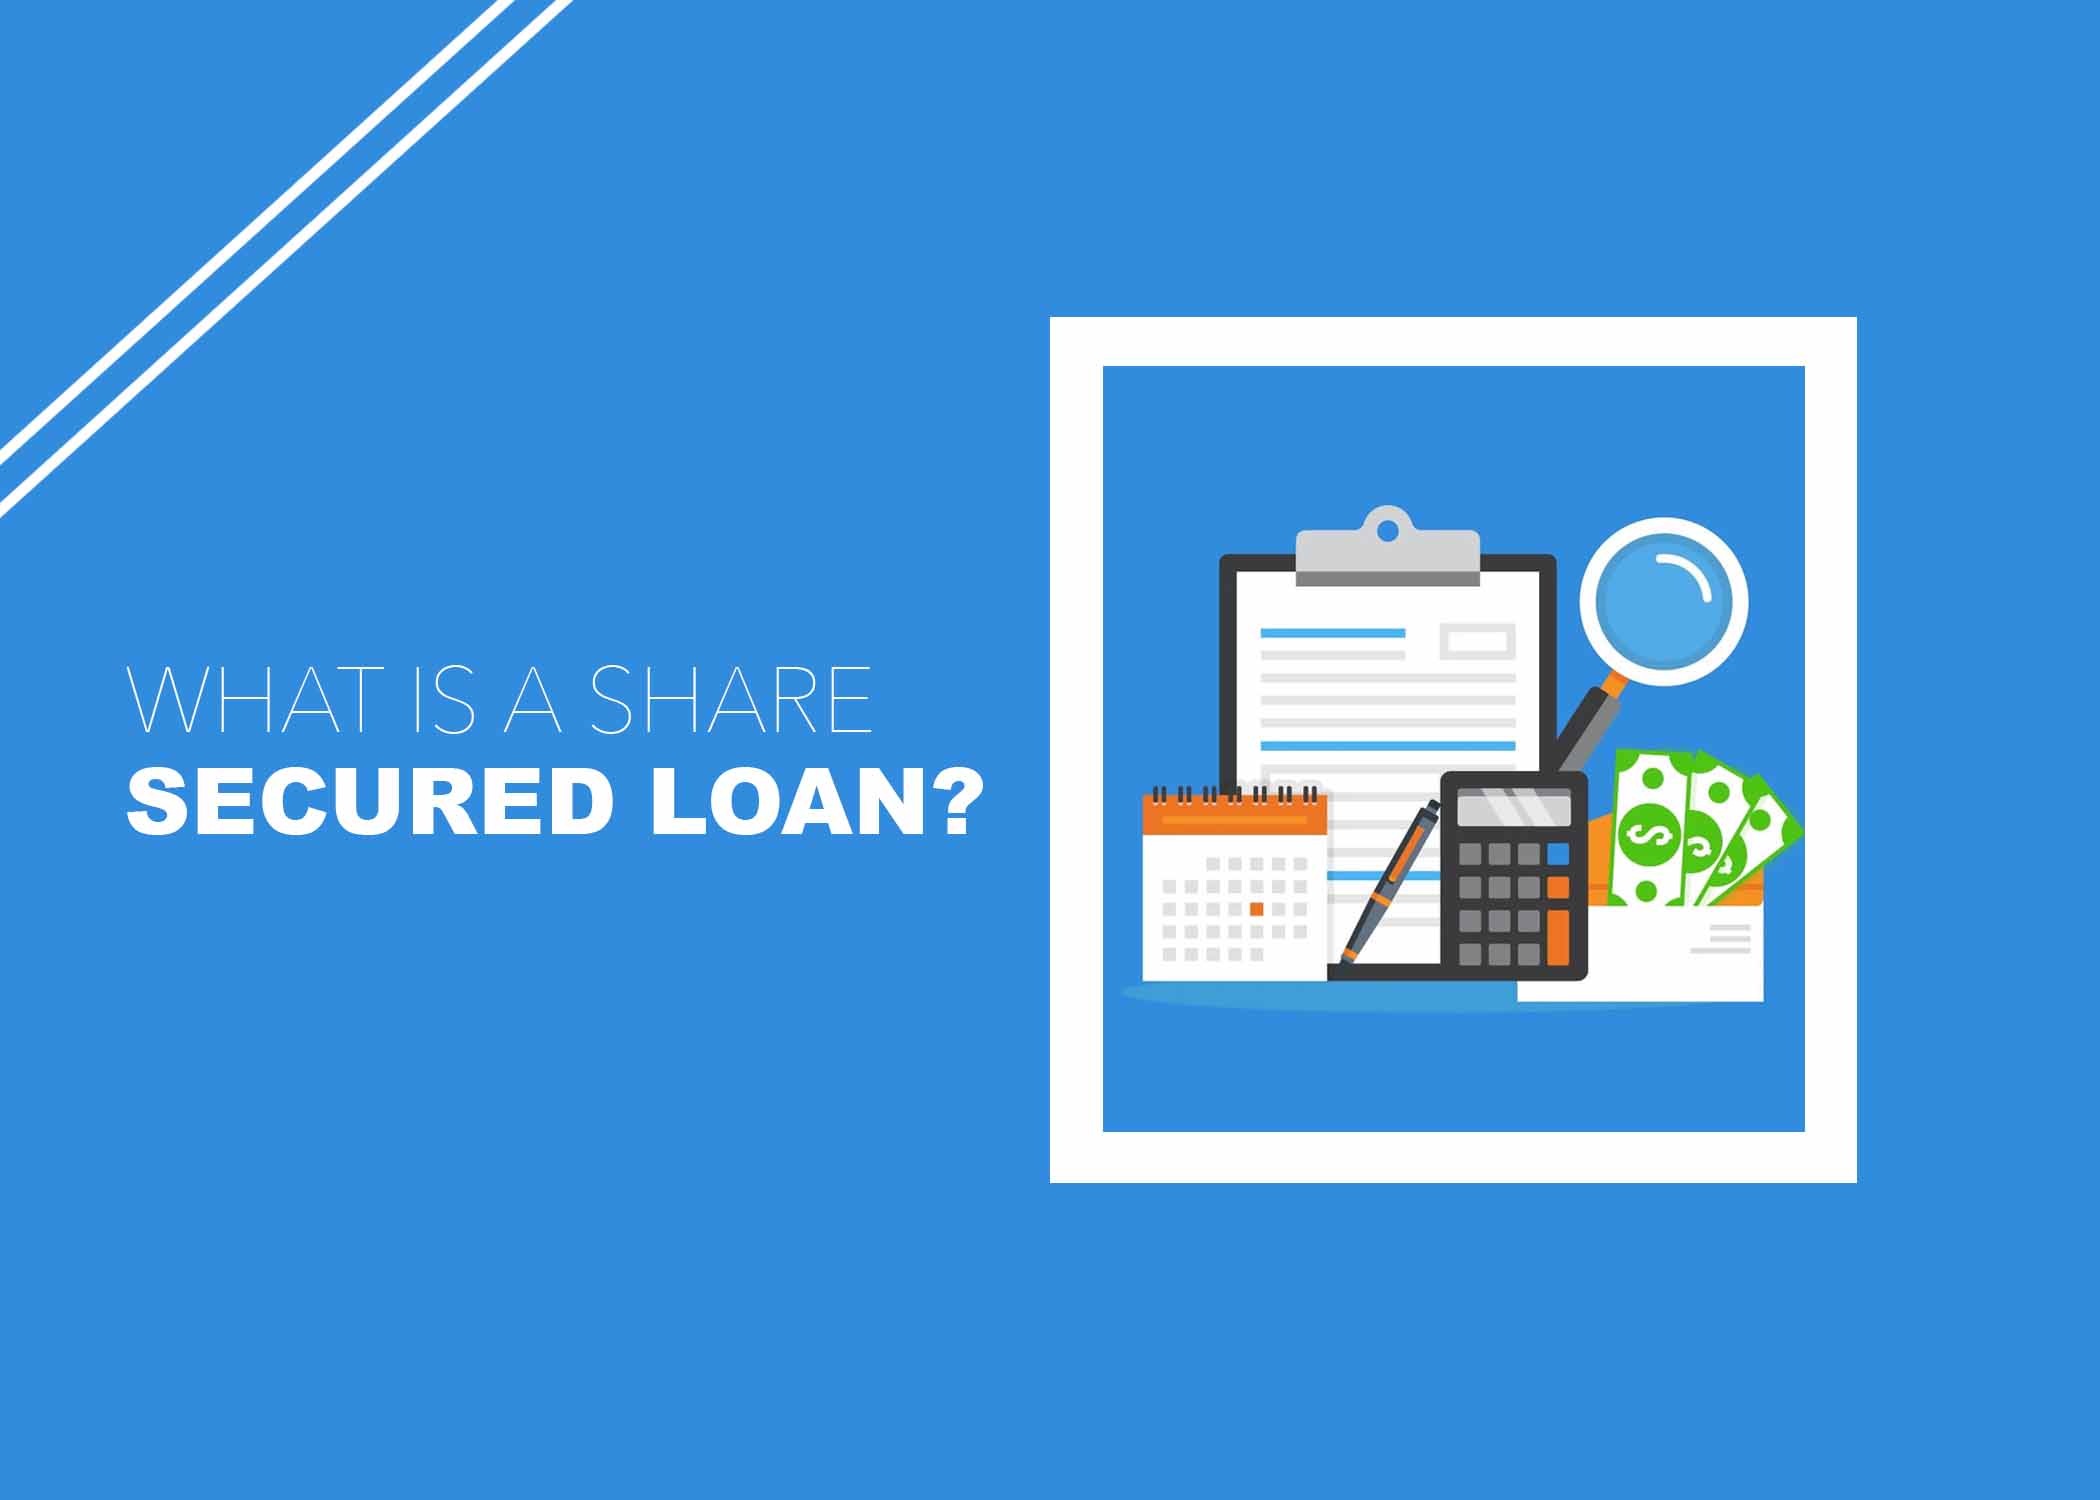 What Is a Share Secured Loan?